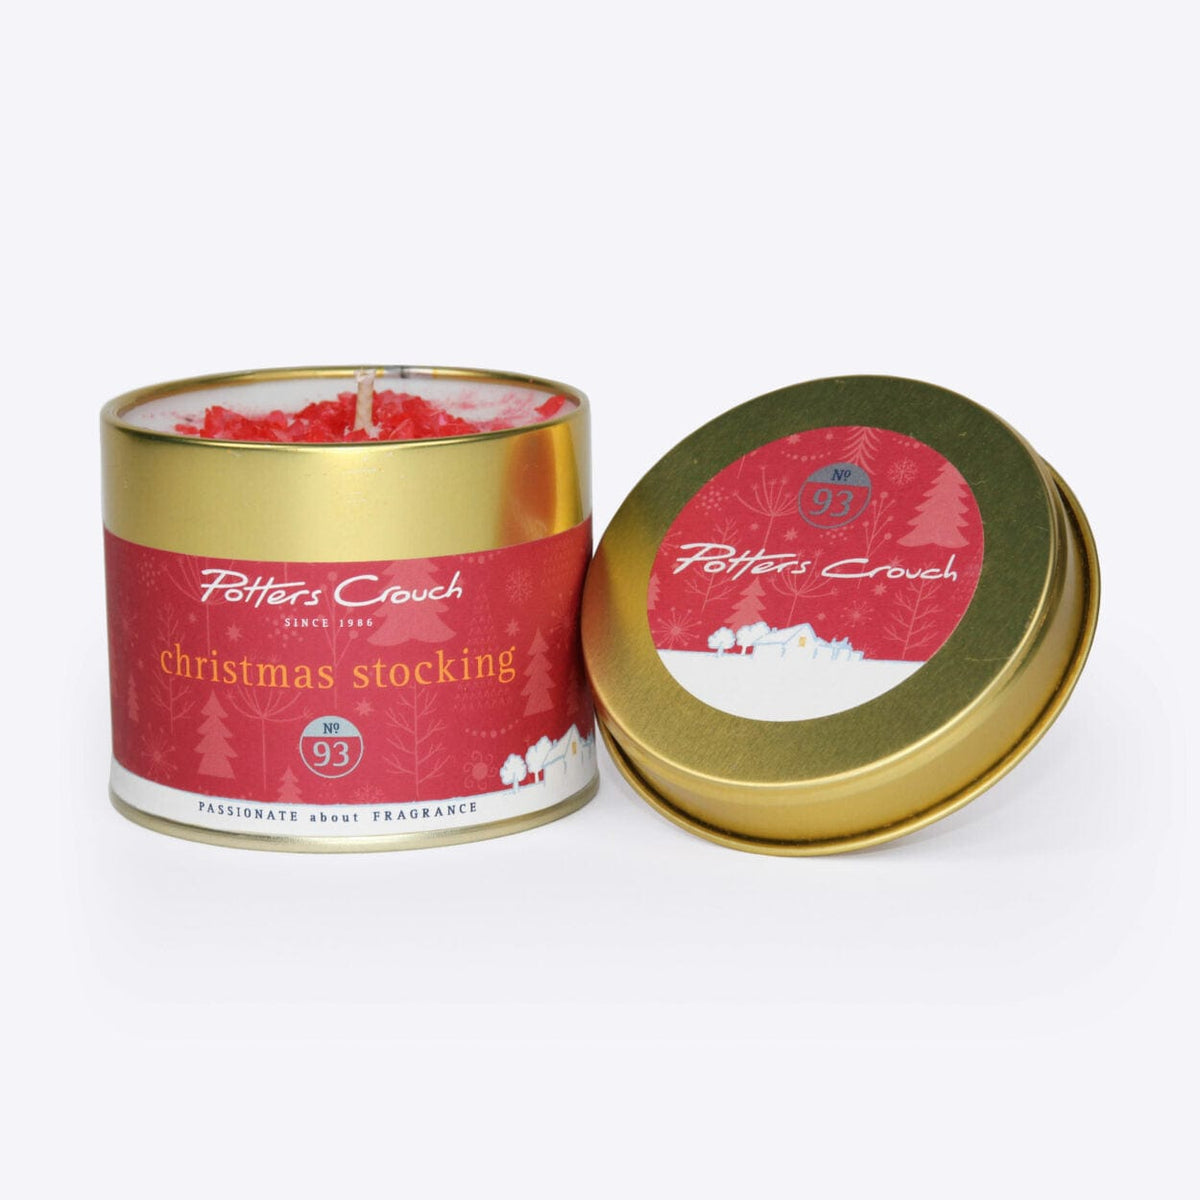 Potters Crouch Christmas Stocking Scented Candle